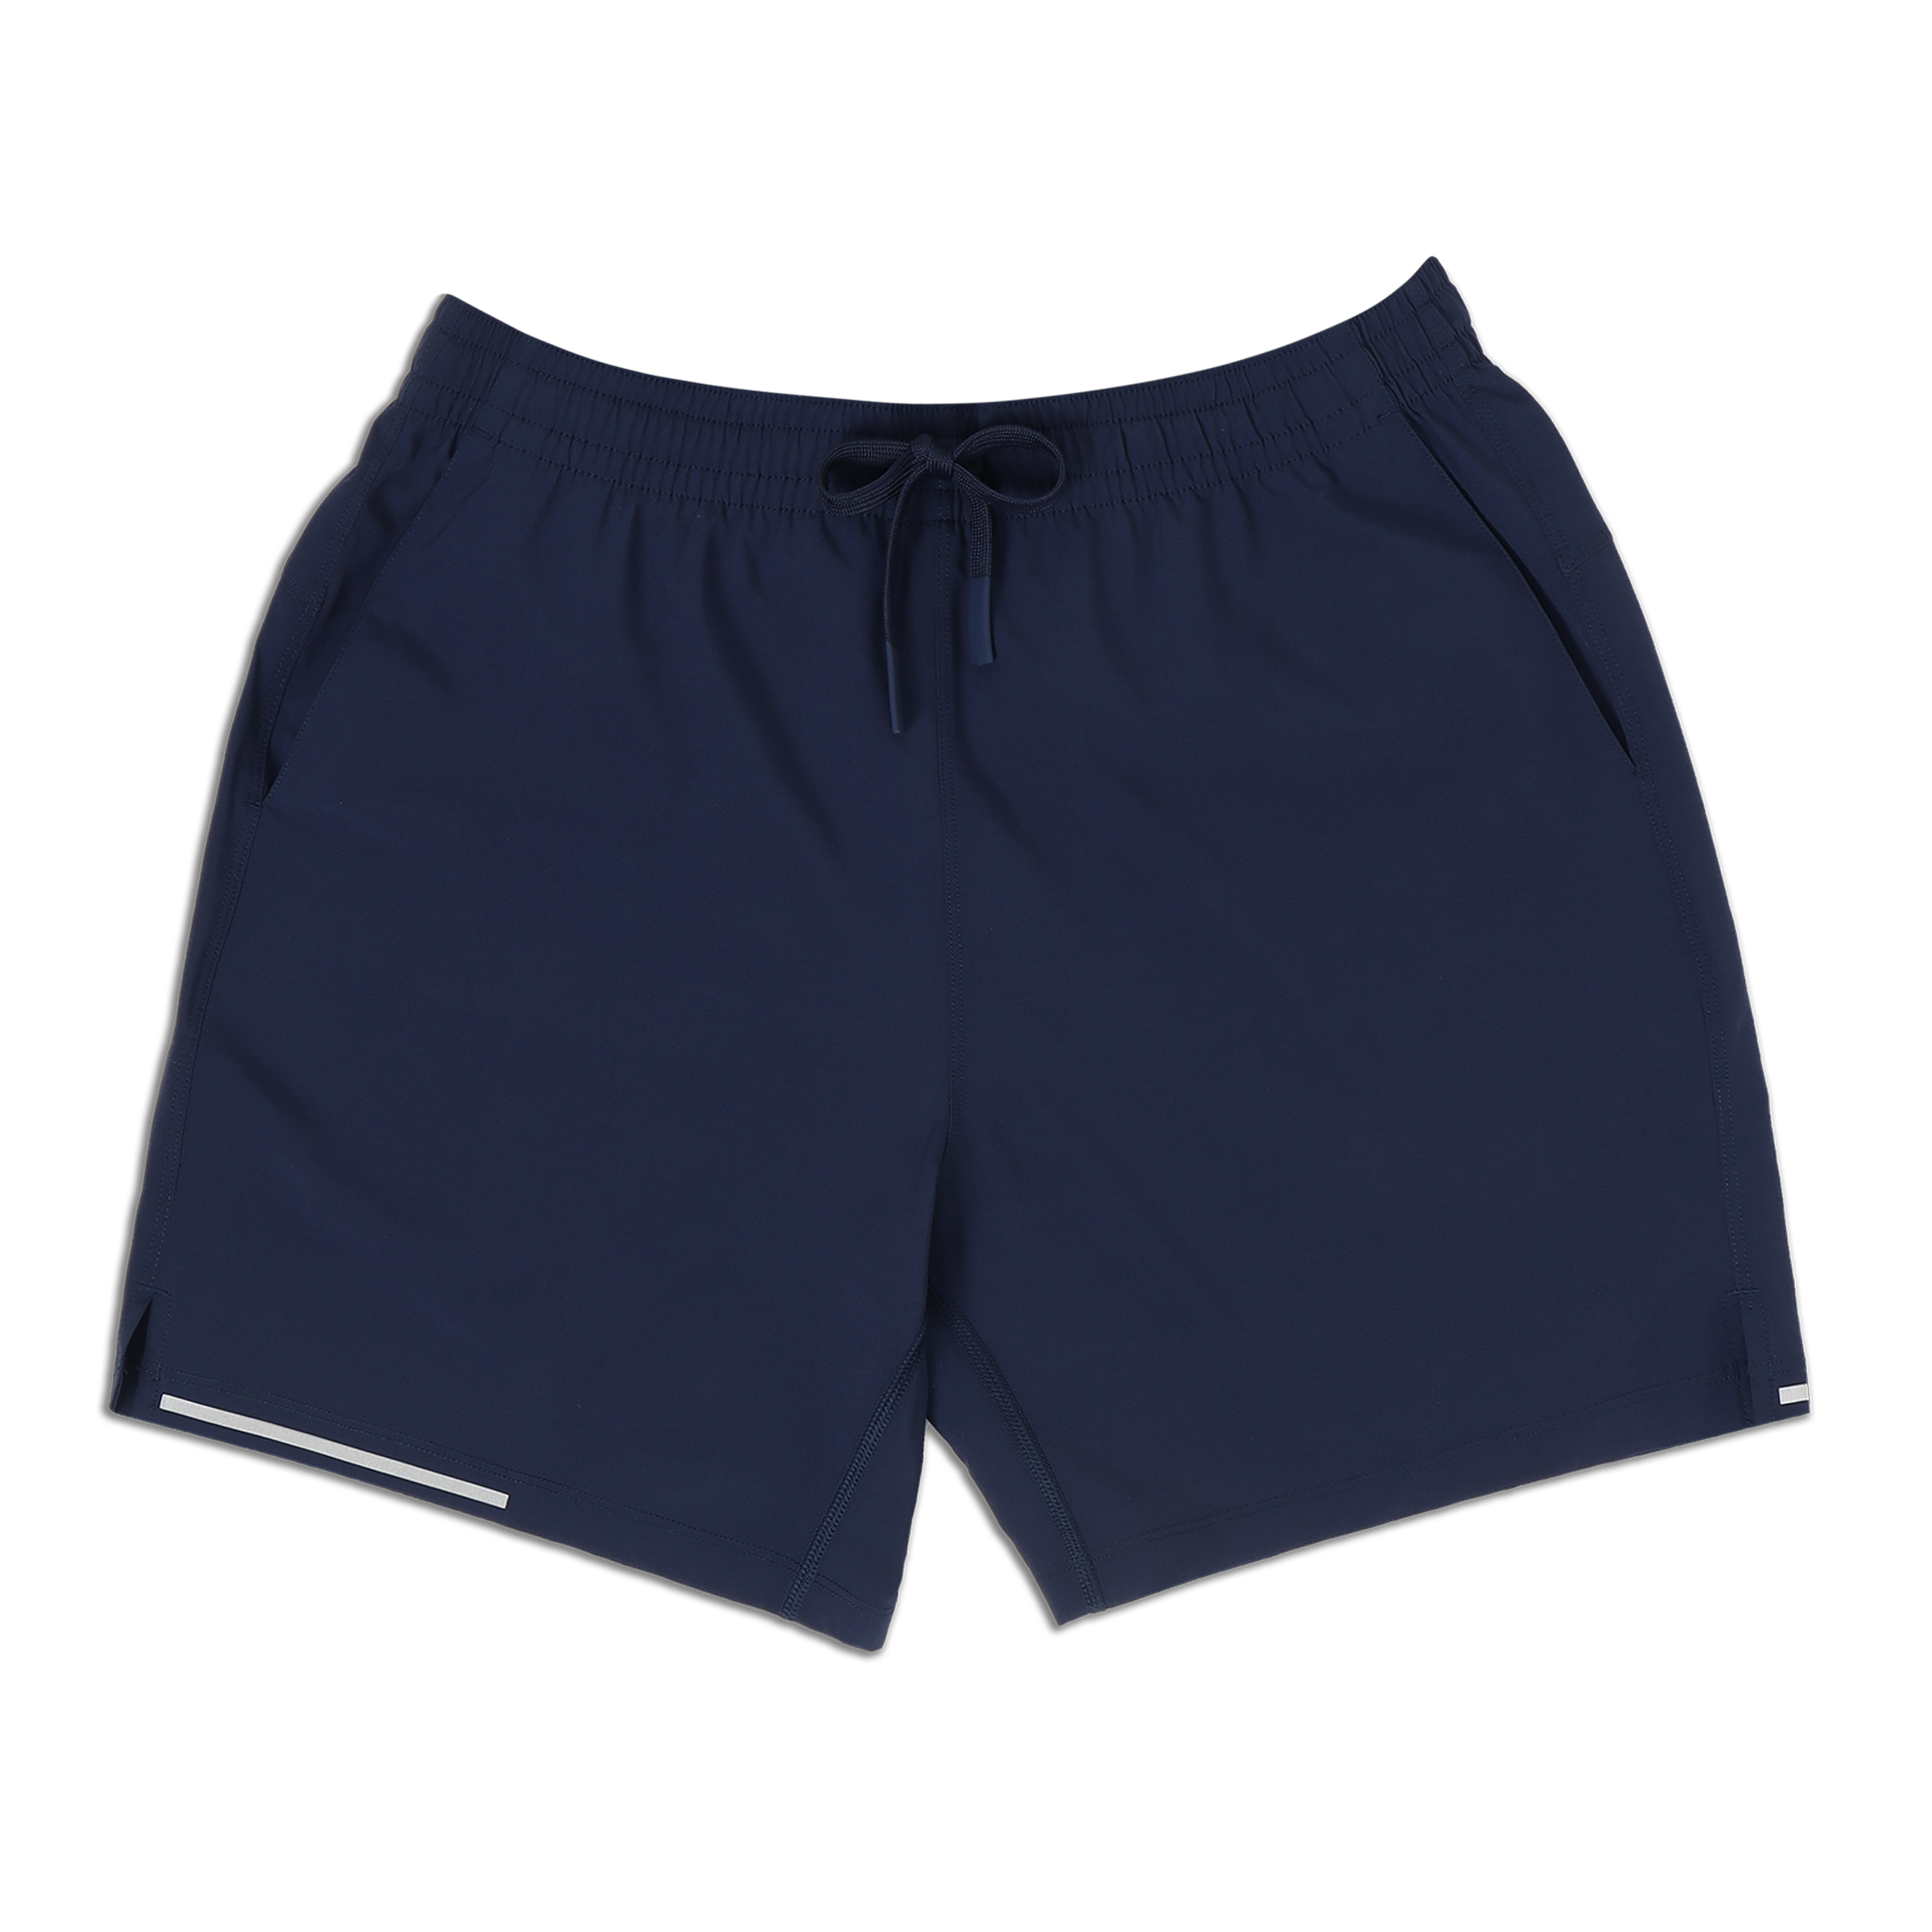 Run Short 5.5" Navy front with elastic waistband, dyed-to-match drawstring with rubberized tips, two front pockets, split hem, and reflective line on bottom right hem